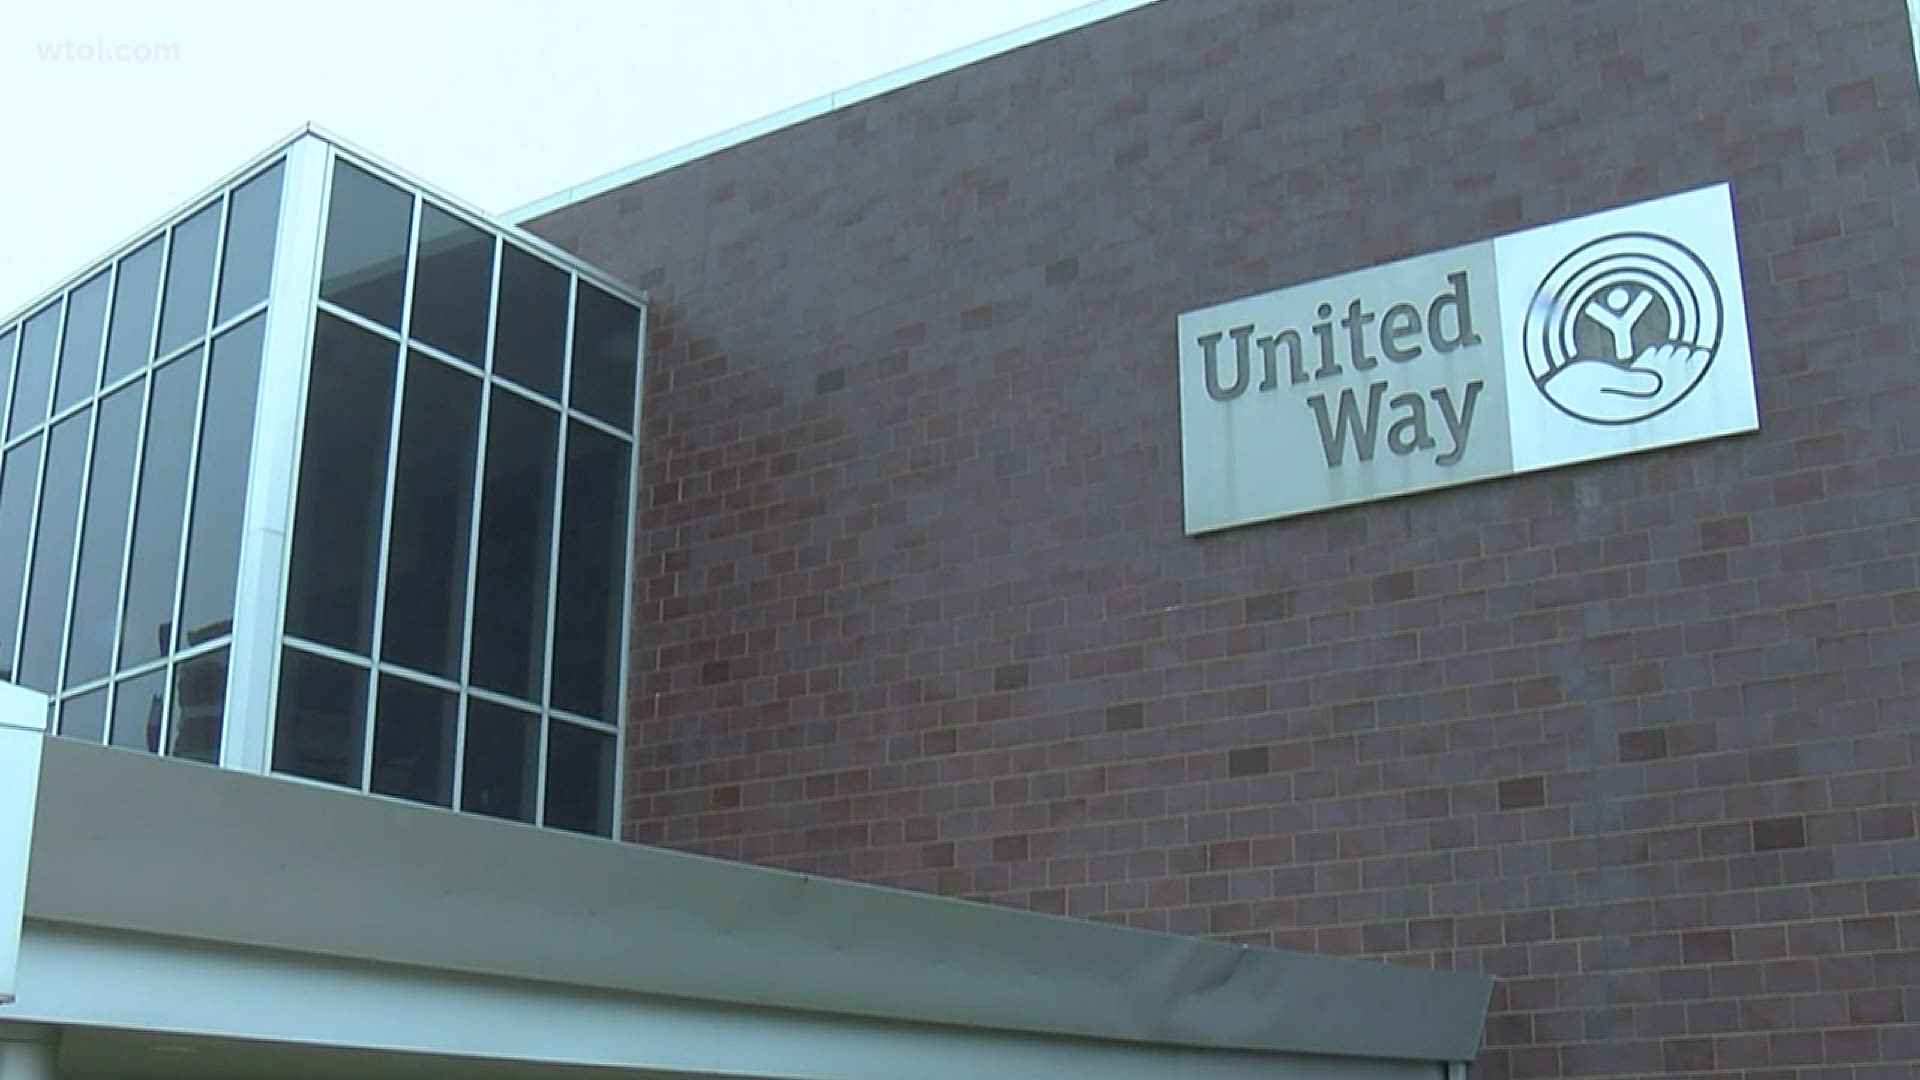 The United Way of Greater Toledo has developed an Emergency Relief Fund for community organizations that are specifically working to combat food insecurity.